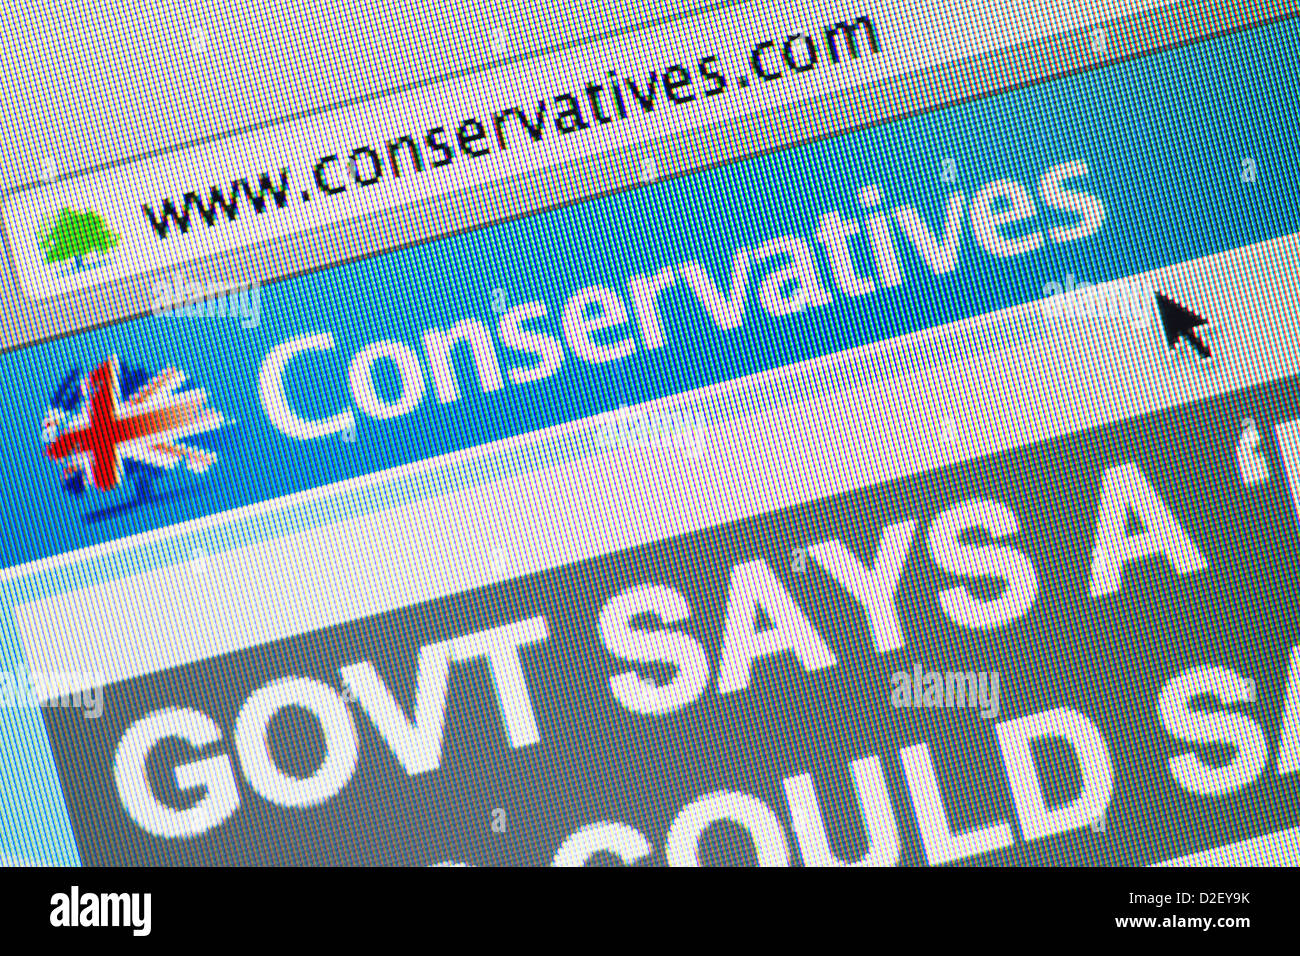 Conservatives logo and website close up Stock Photo